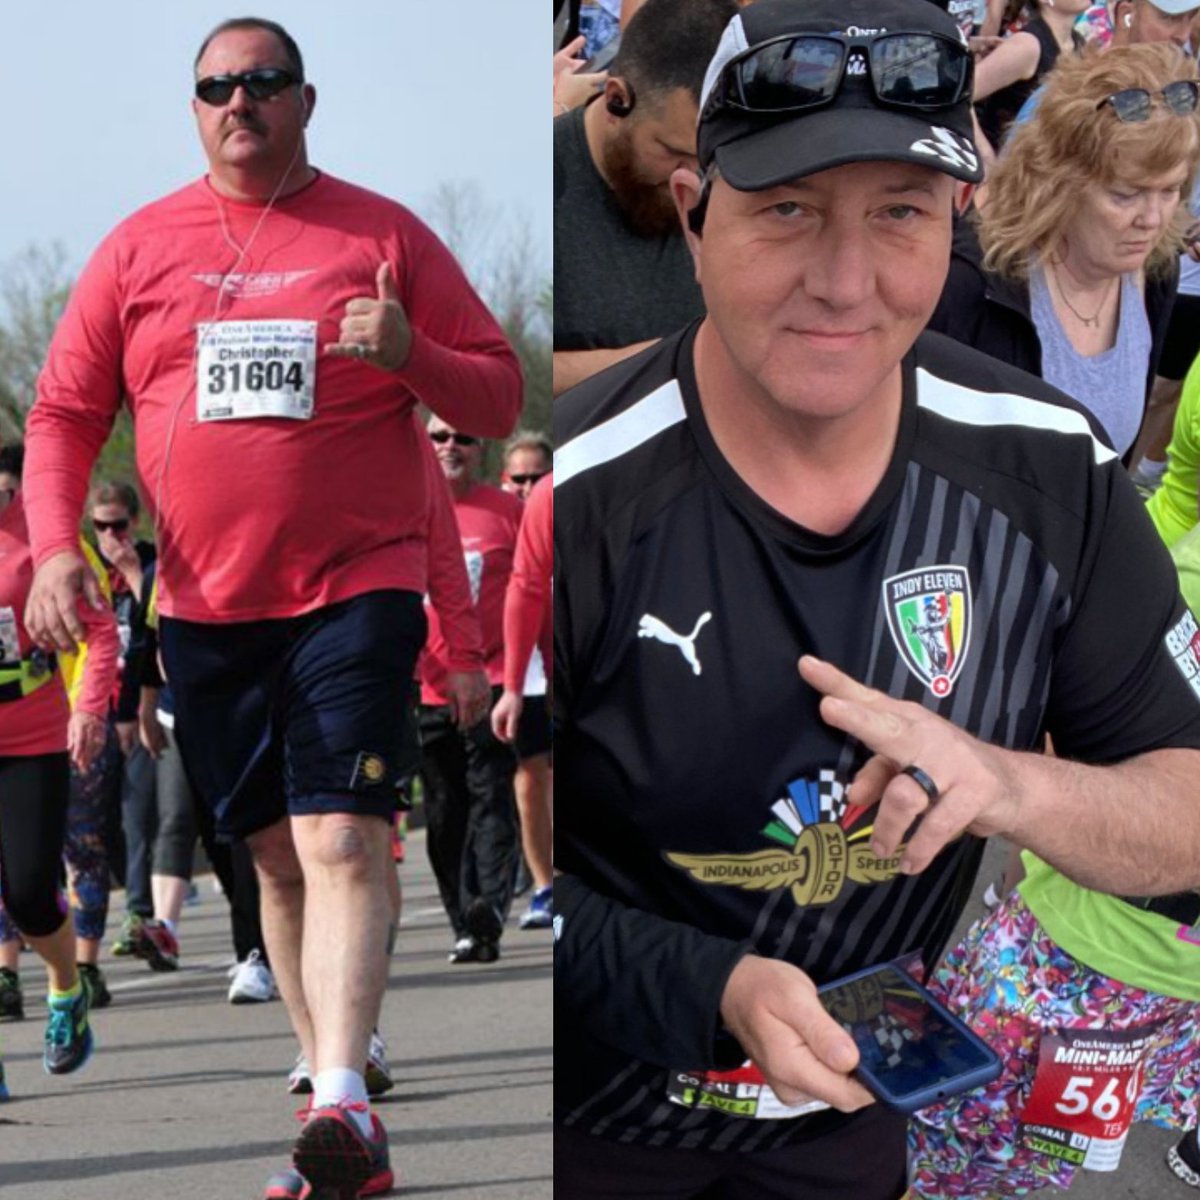 Check this out!
Me doing my 1st #indymini in 2014 weighing over 325lbs & this year at 265lbs